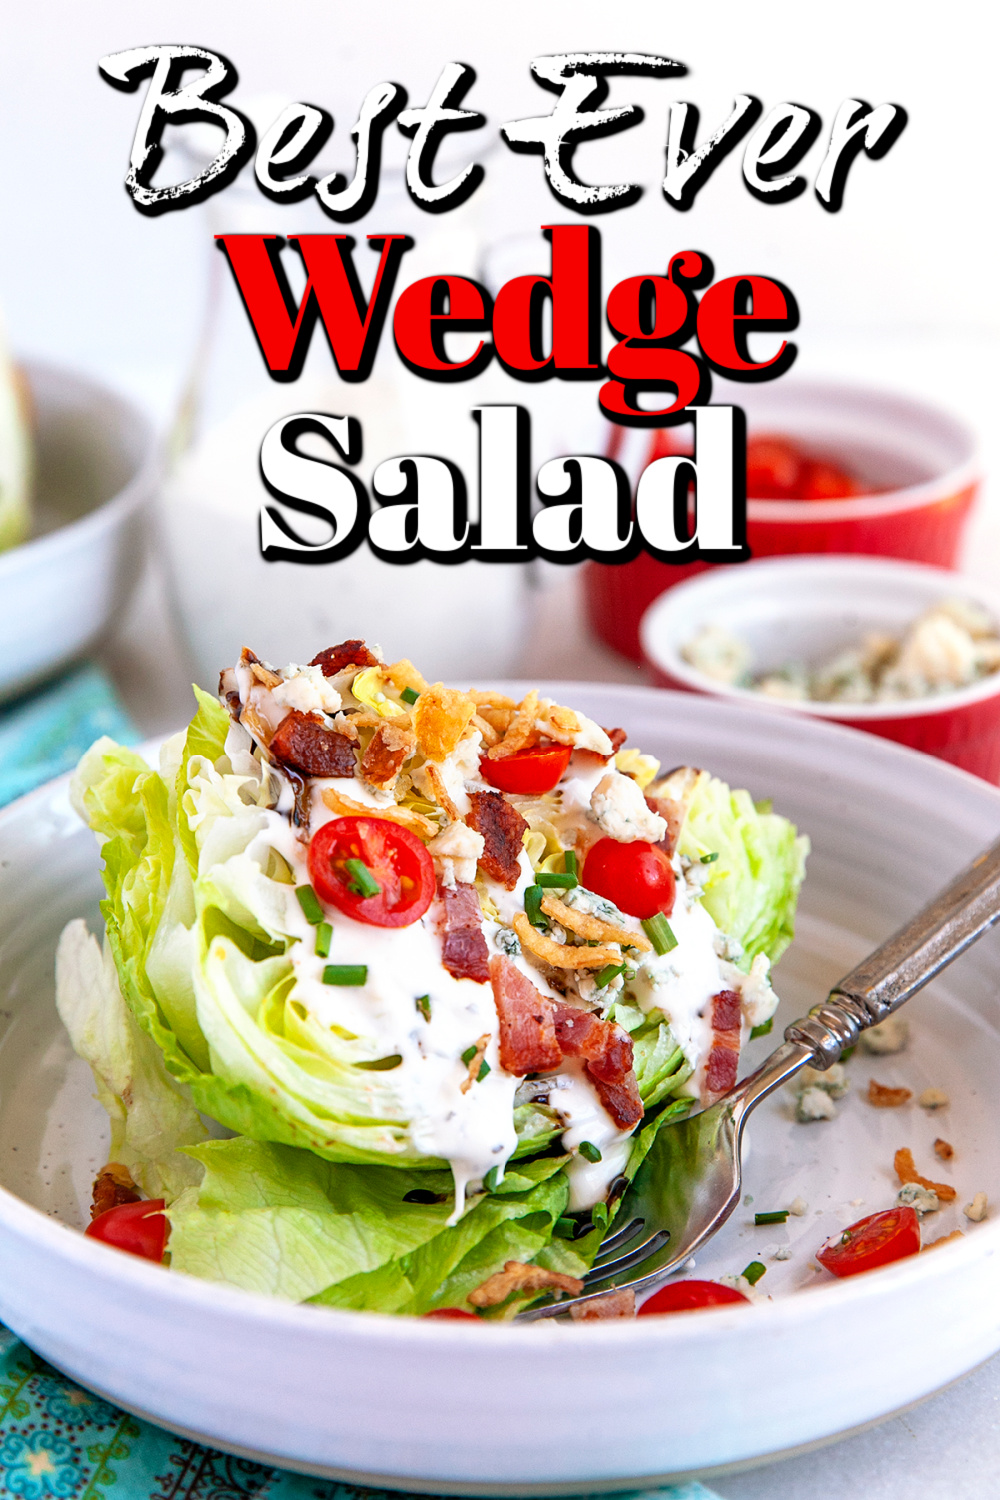 Best Ever Wedge Salad Pin.